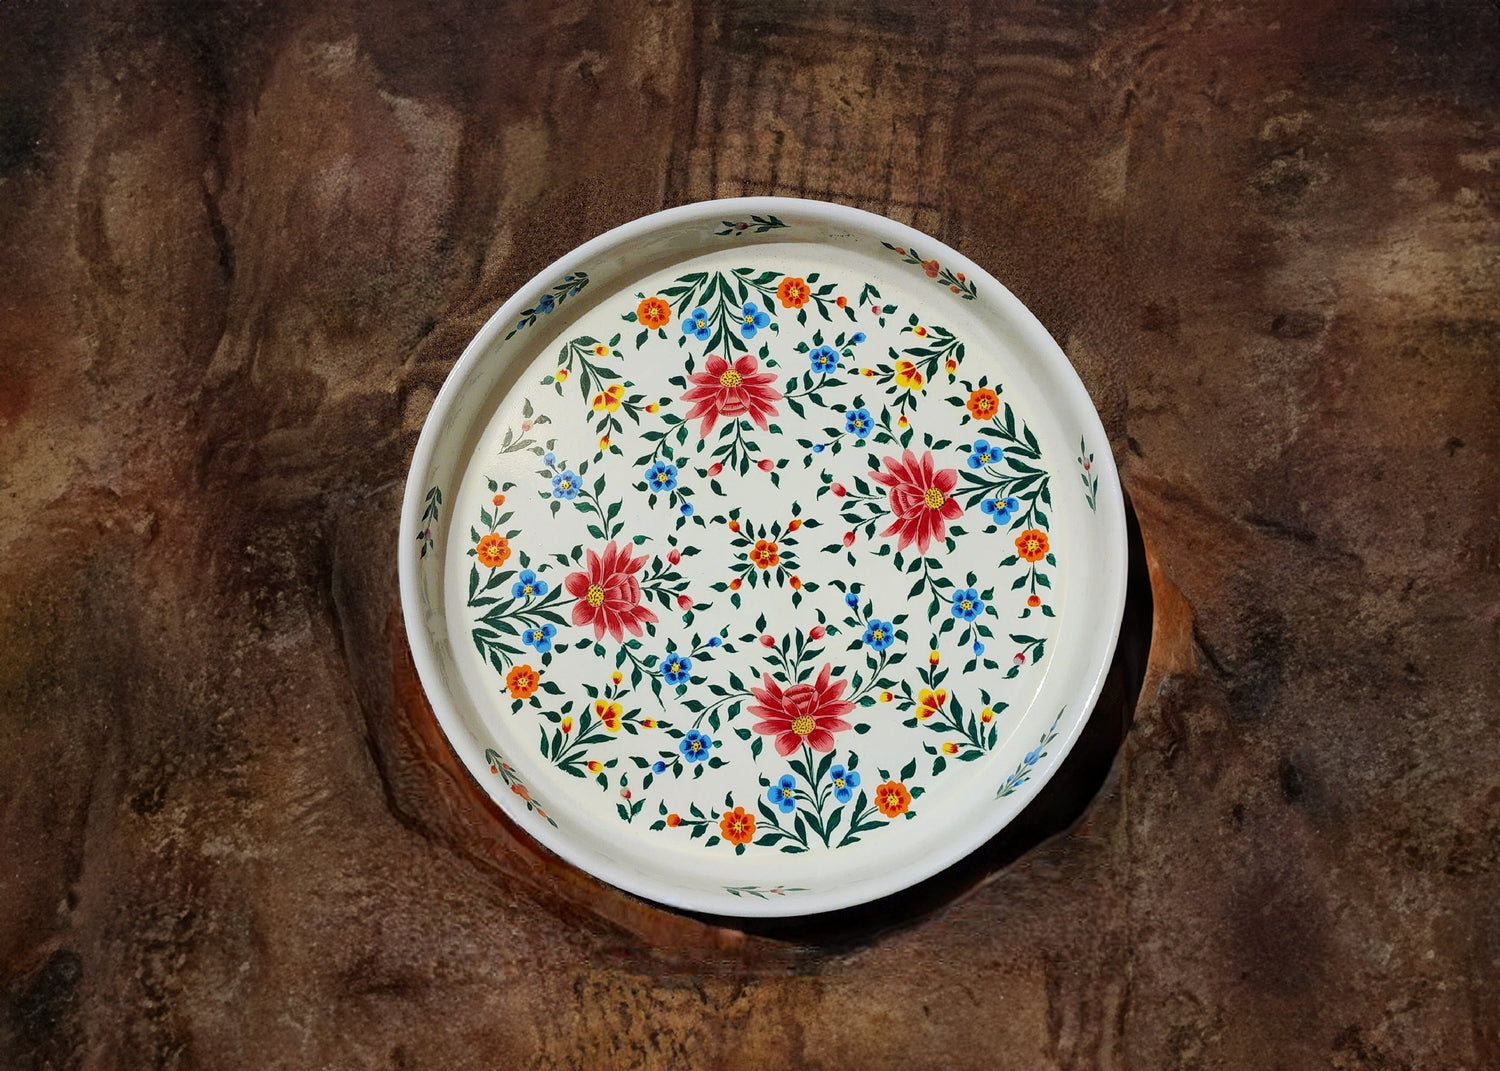 Painted Steel Enamelware Tray with Multicolored Foliage Art